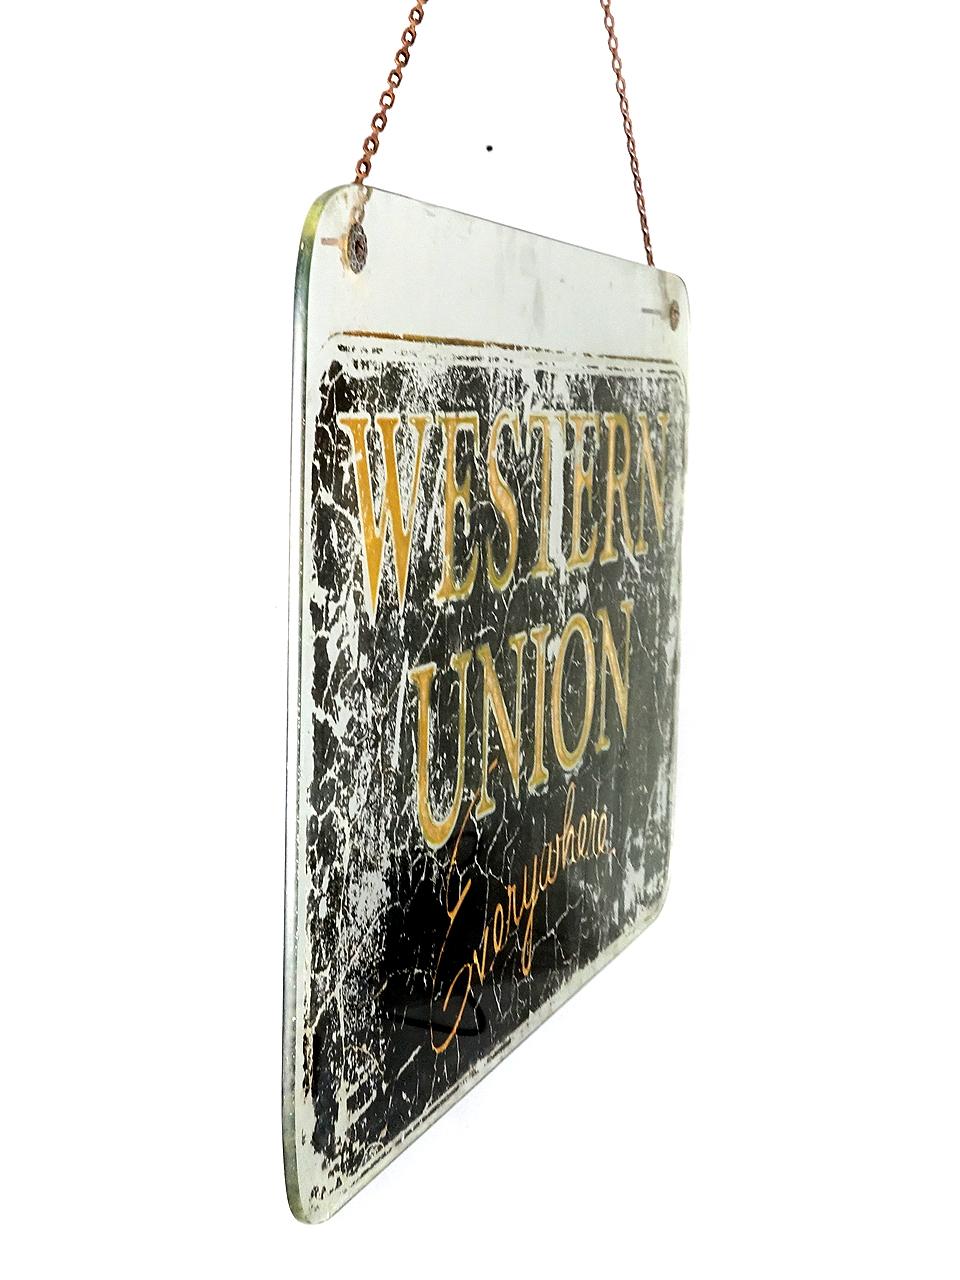 This is the earliest Western Union sign we have ever come across. I'm guessing it dates to circa 1870s. Its hand painted on glass heavy glass. The rounded corners are all hand shaped. The patina is amazing... this is a real survivor.